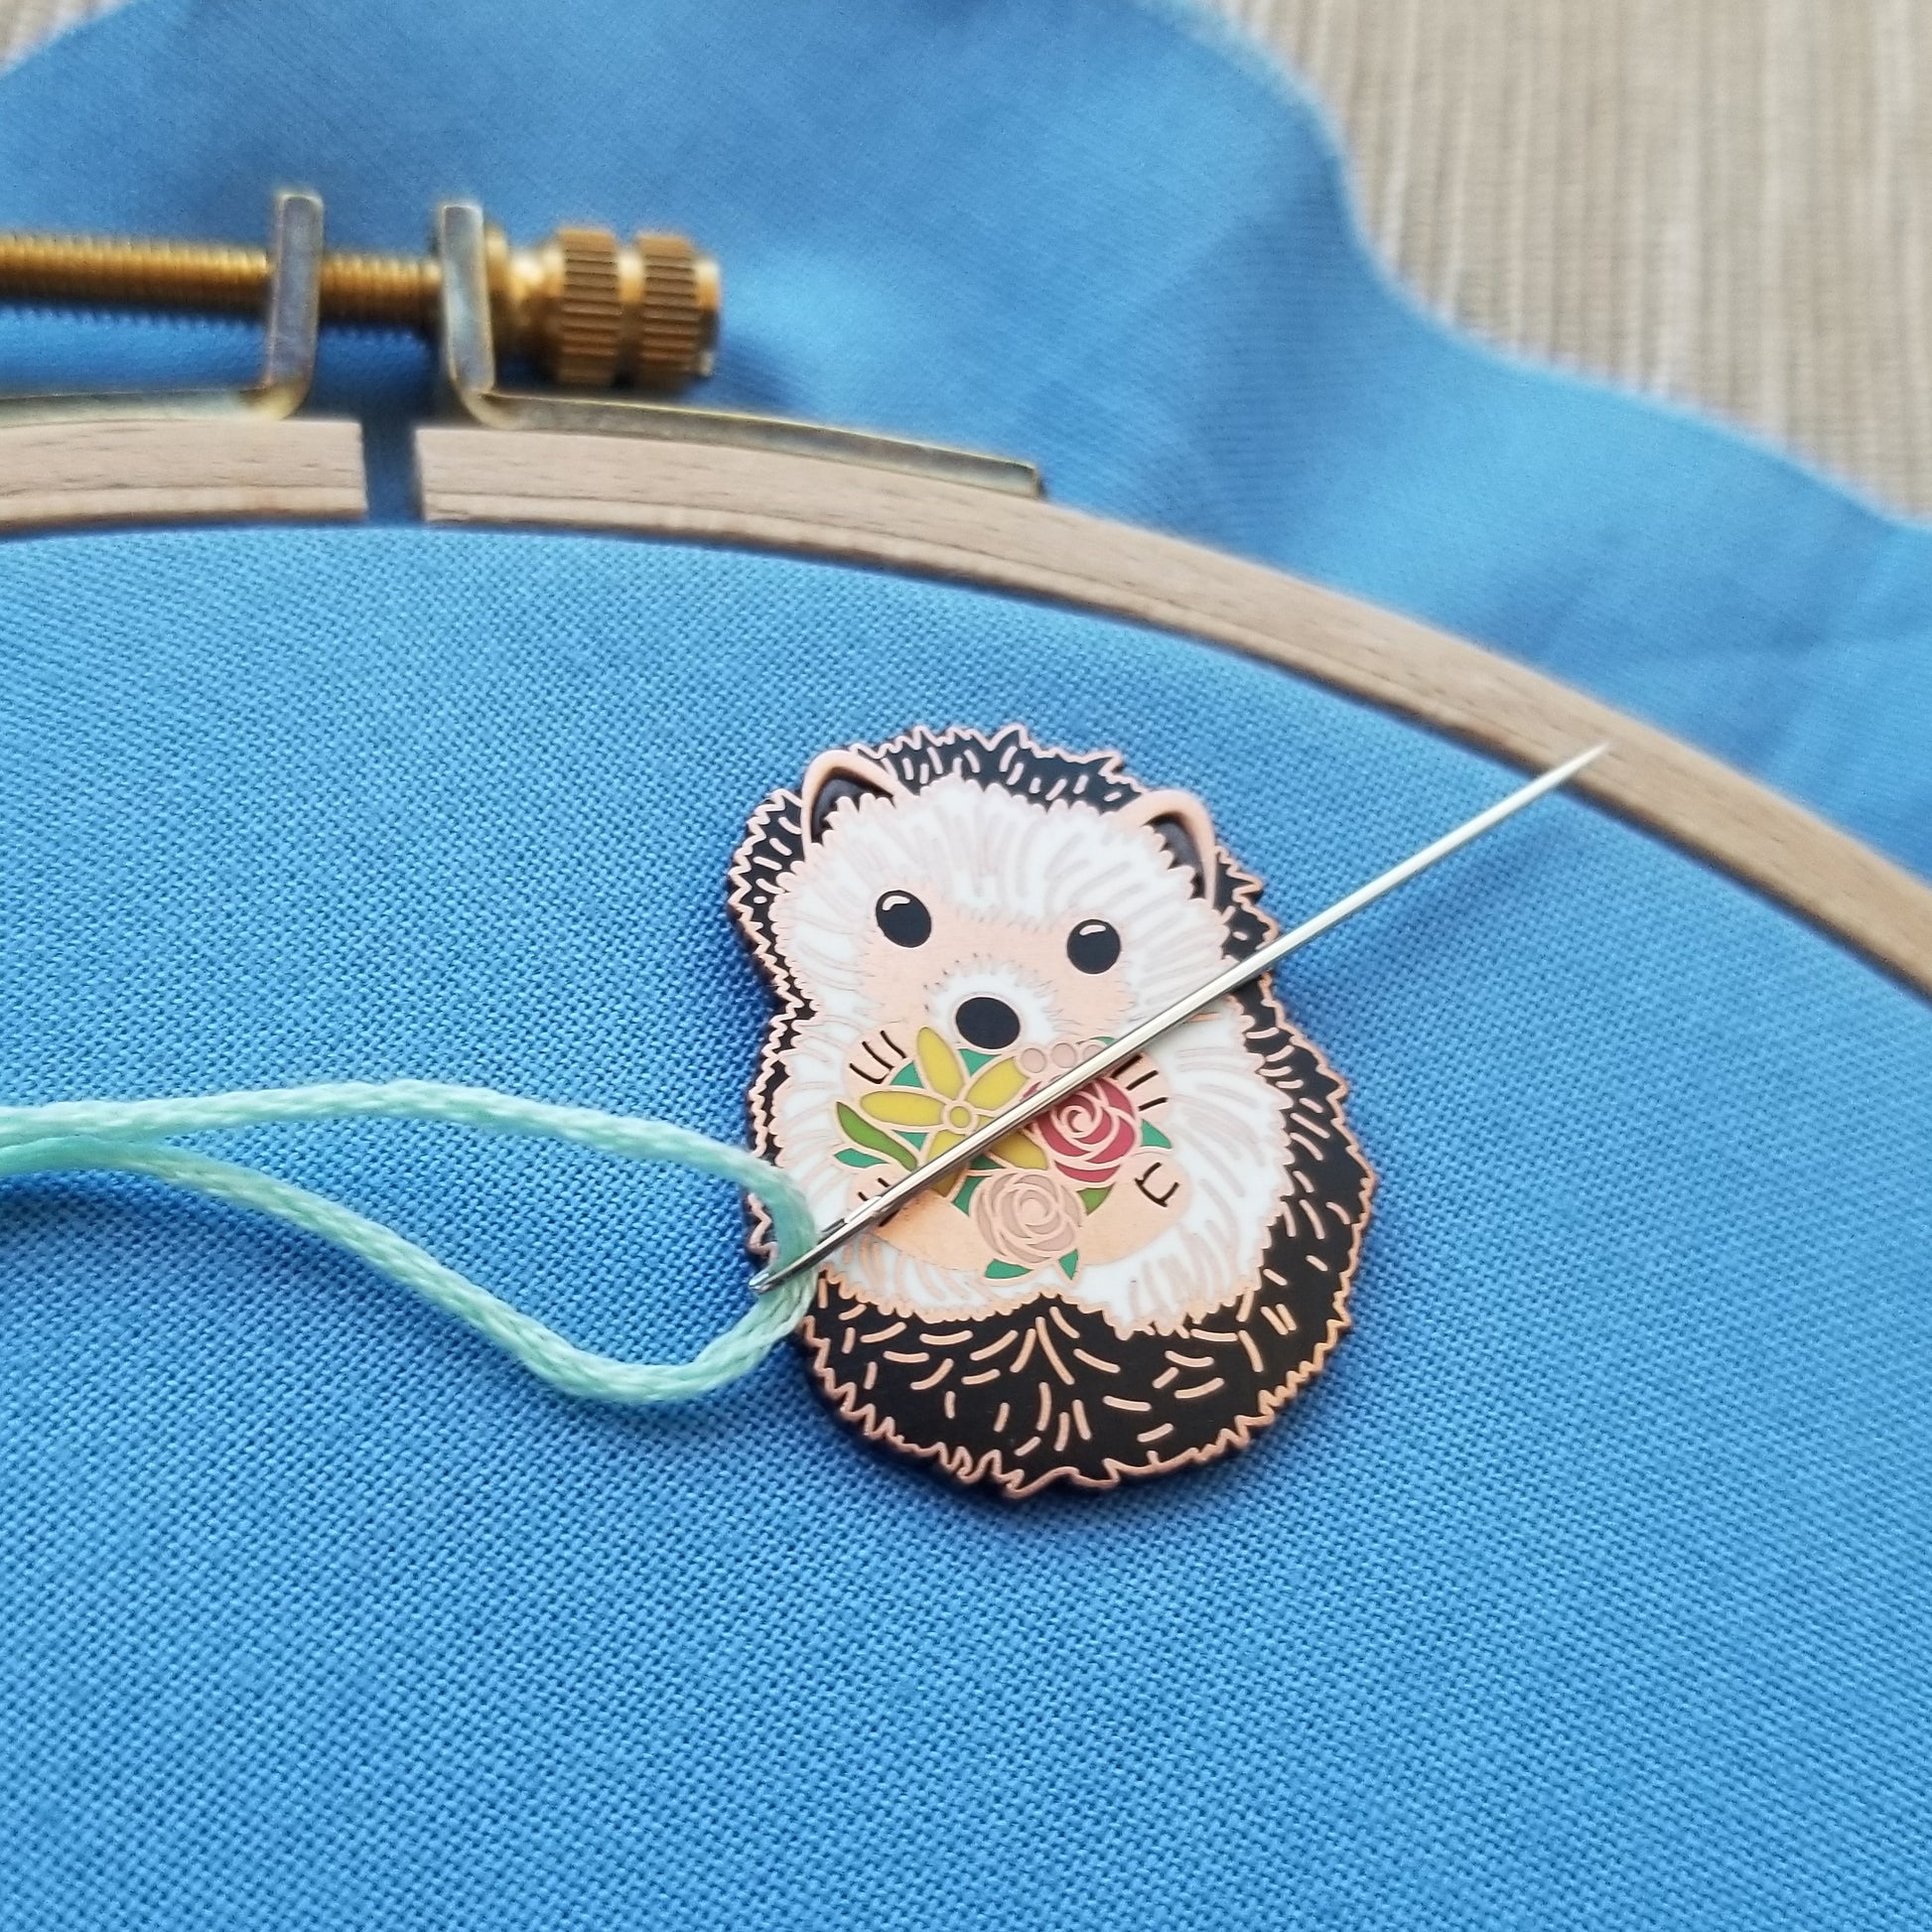 Crafty Woodland Creatures Needle Minders  Cute Stitching Hedgehog, Ow –  Snarky Crafter Designs